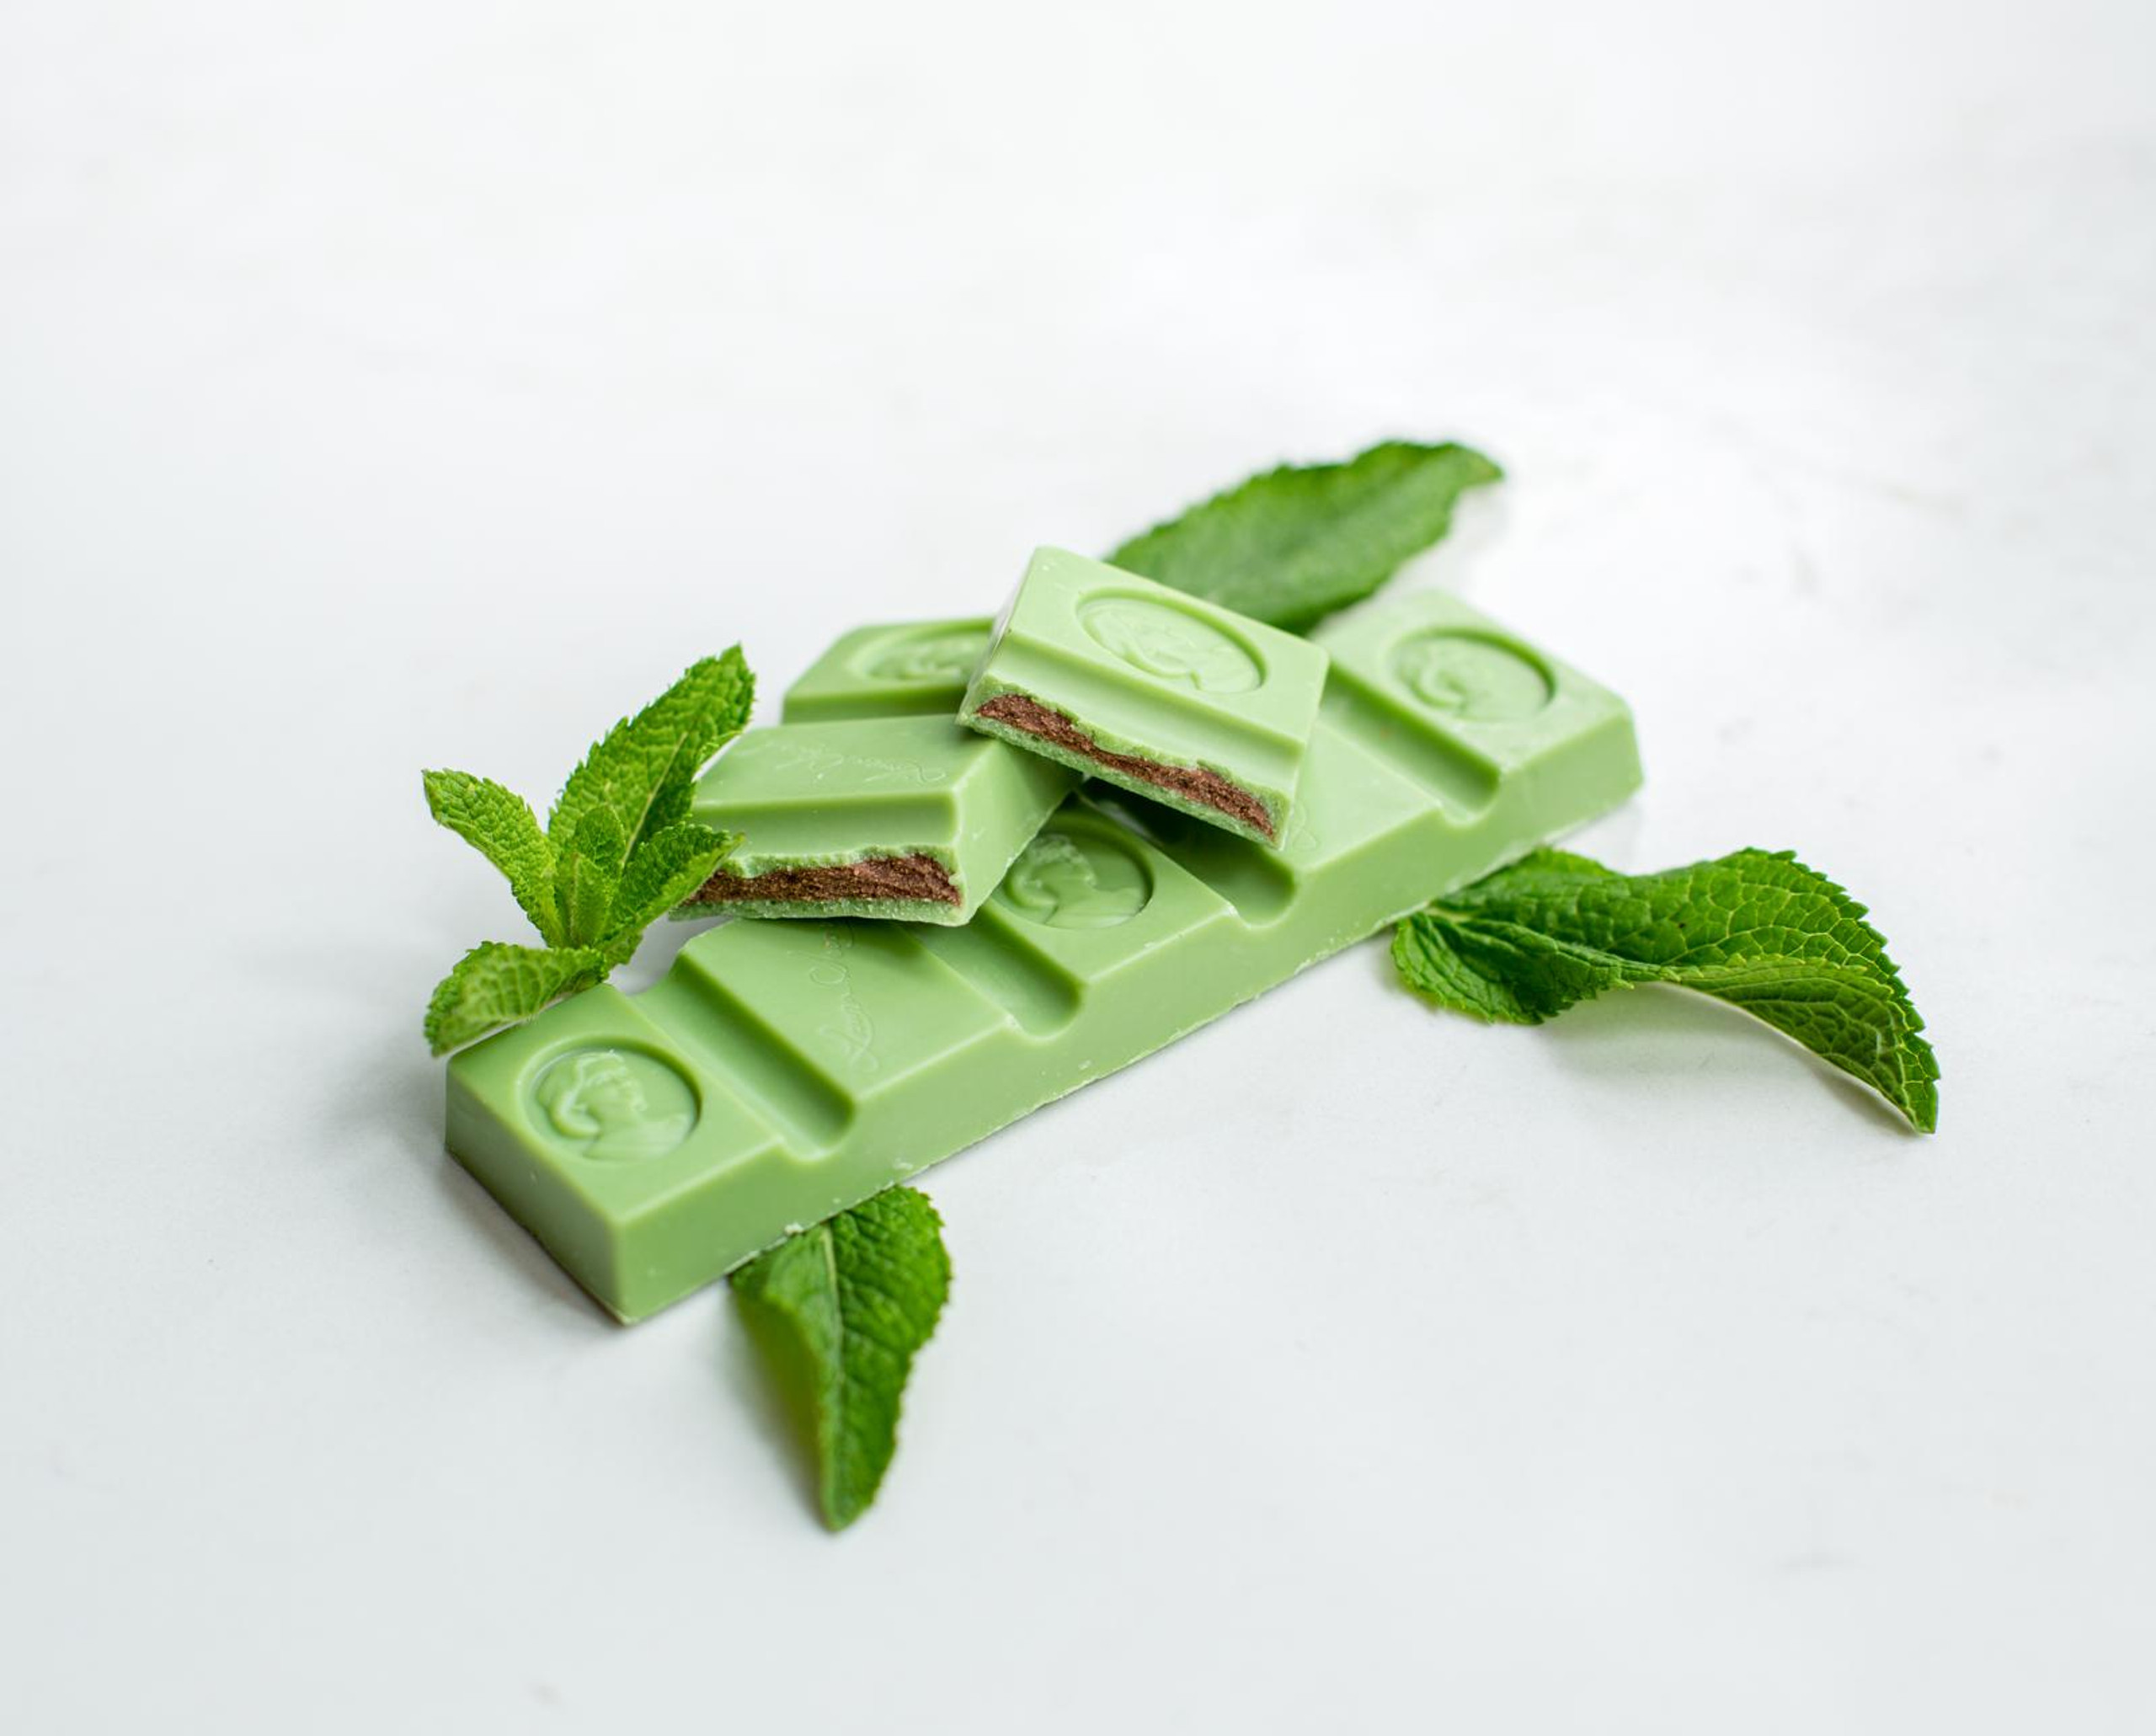 Frosted Mint Bar 50 g [89064]